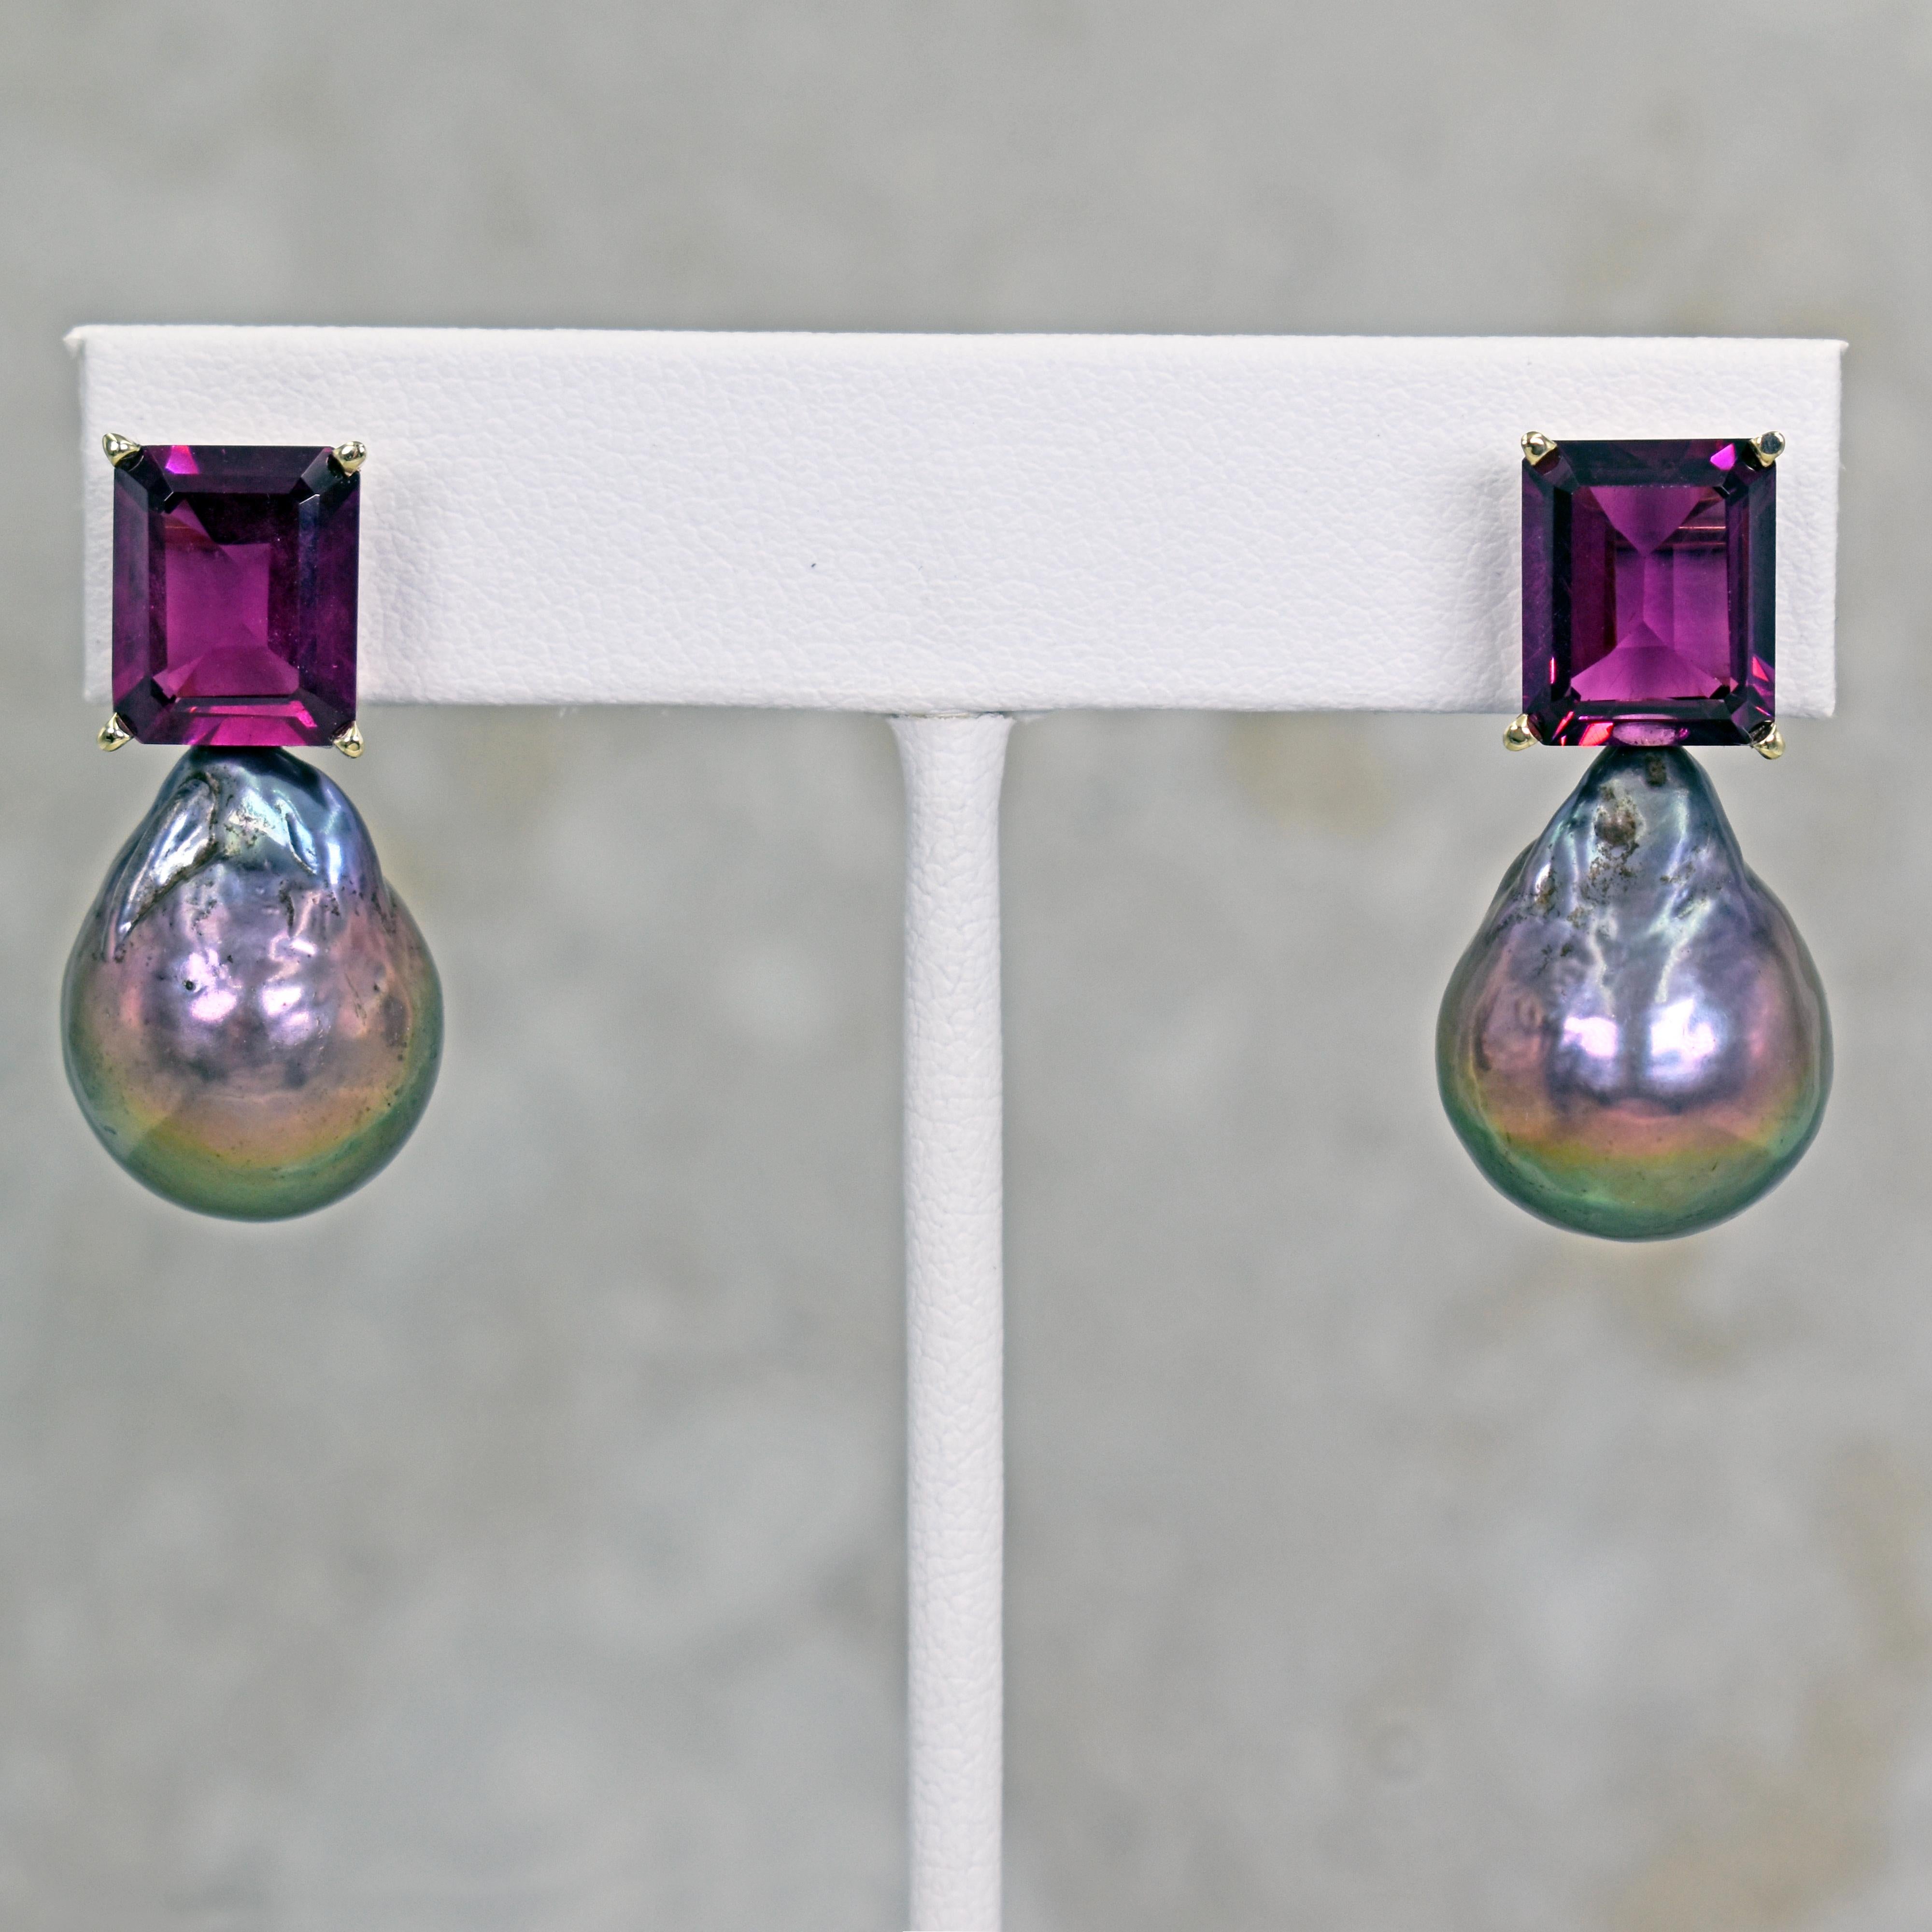 Gorgeous and unique 14k yellow gold stud earrings featuring two emerald-cut pinkish purple Rhodolite Garnet gemstones, totaling 9.73 carats, and Tahitian Baroque Pearls. Stud earrings are 1.19 inches or 30 mm in length. These artisan drop earrings